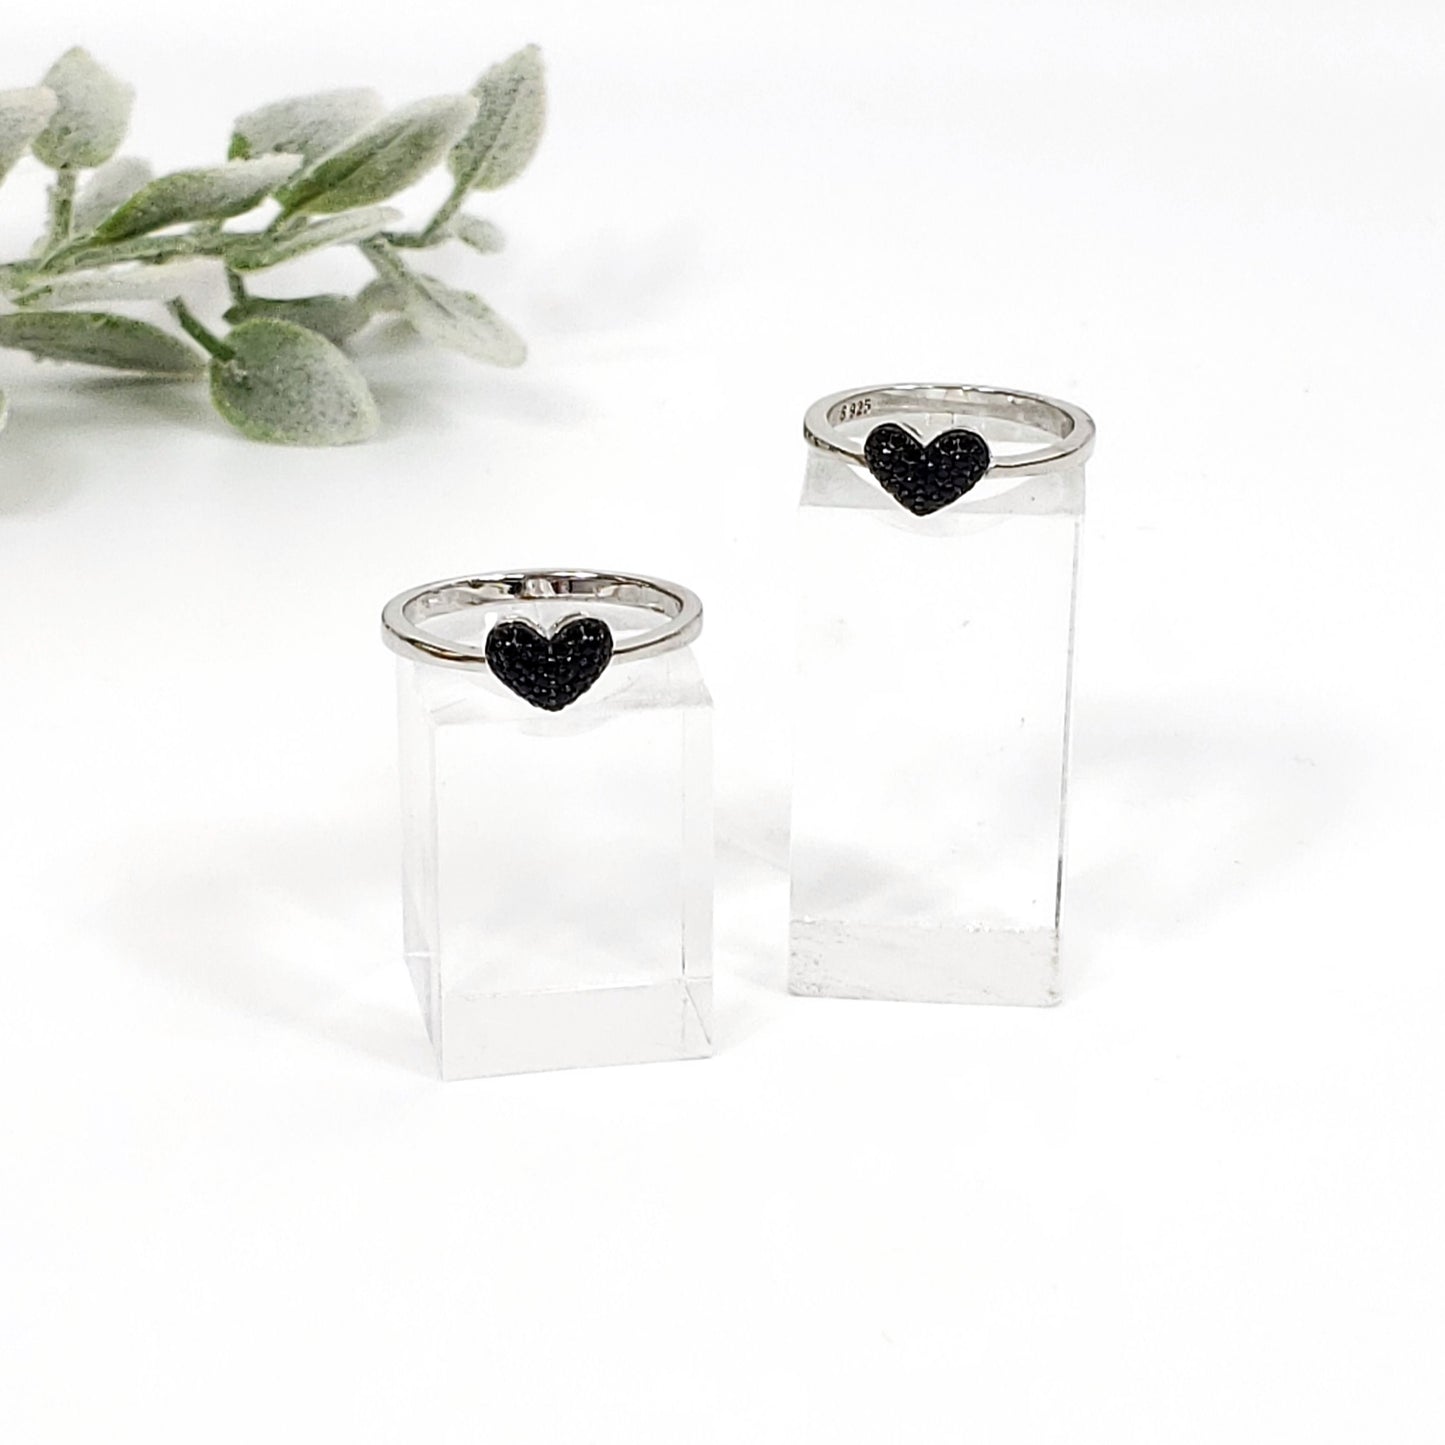 Protective Black Spinel Heart Shaped Ring